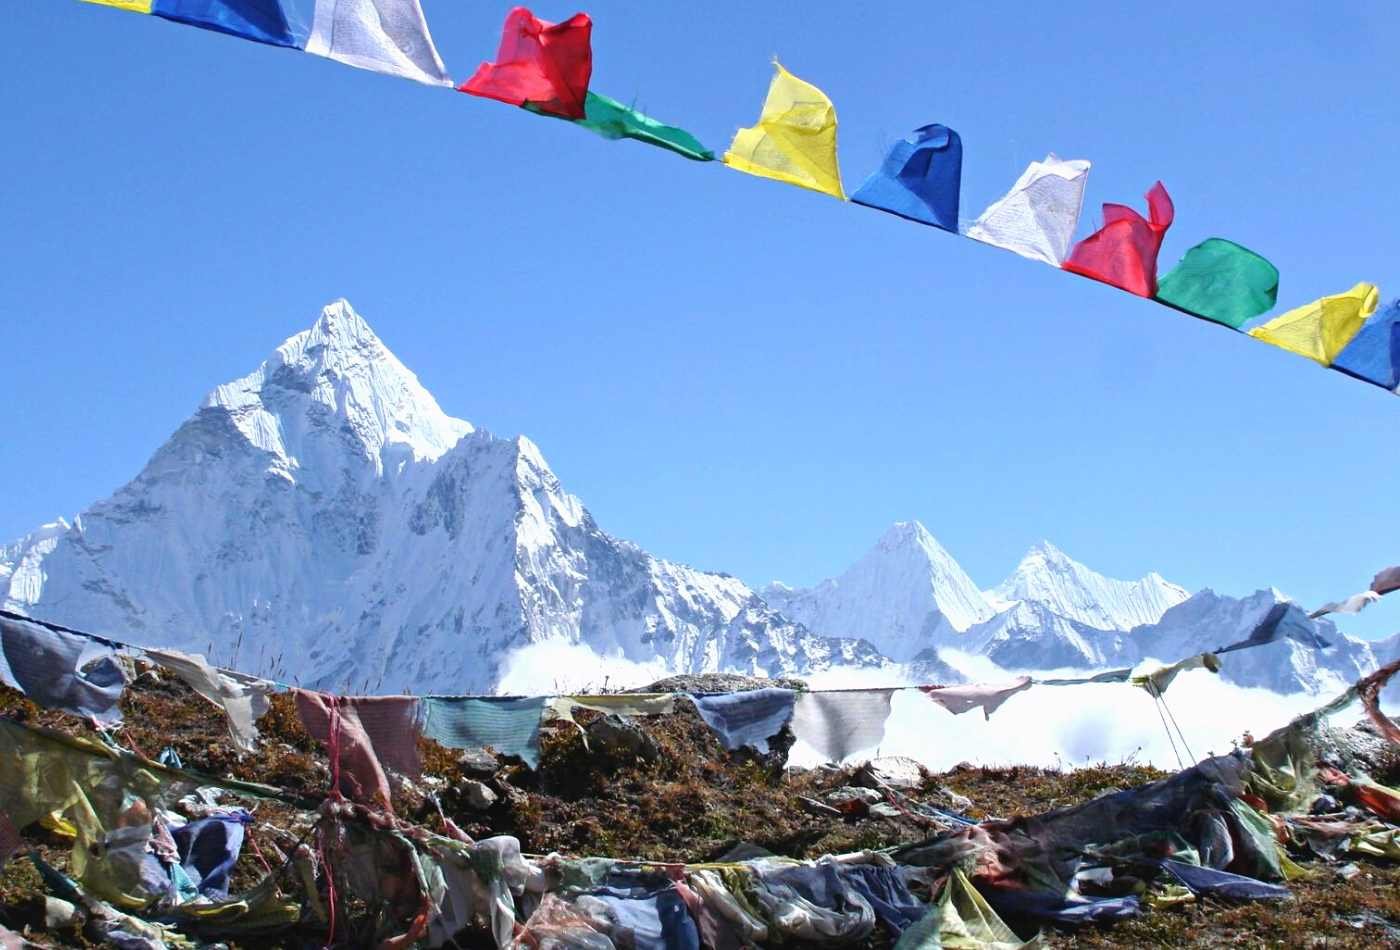 Mt. Amadablam as seen from Thukla, with colorful prayer flags placed in front of the mountain, offering prayers and good wishes.